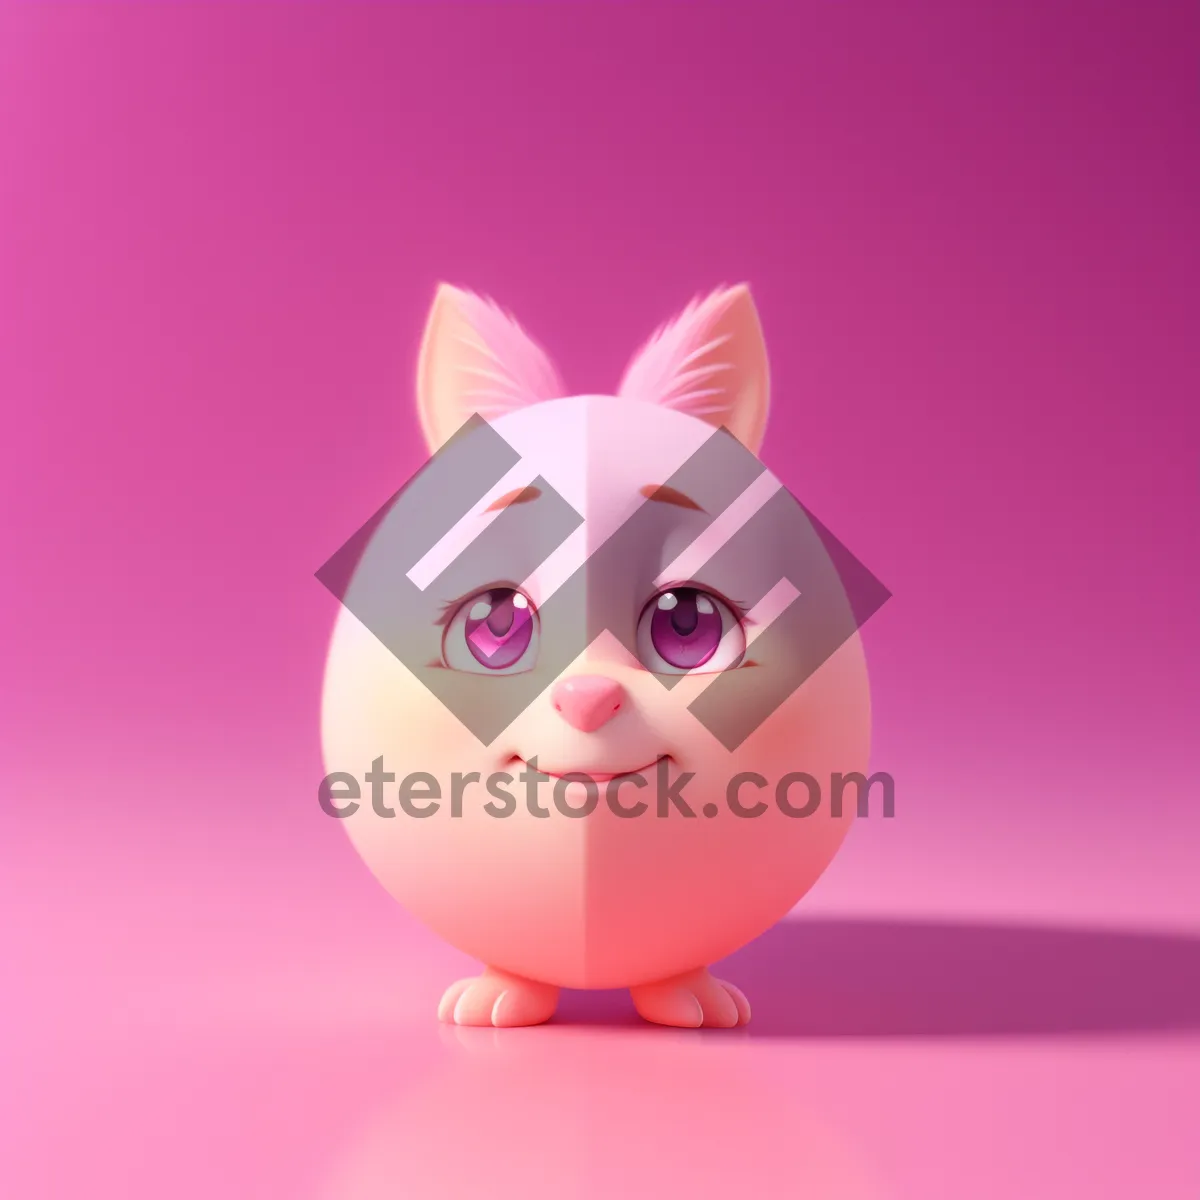 Picture of Cute Piggy Bank with Bunny Ears - Savings Symbol